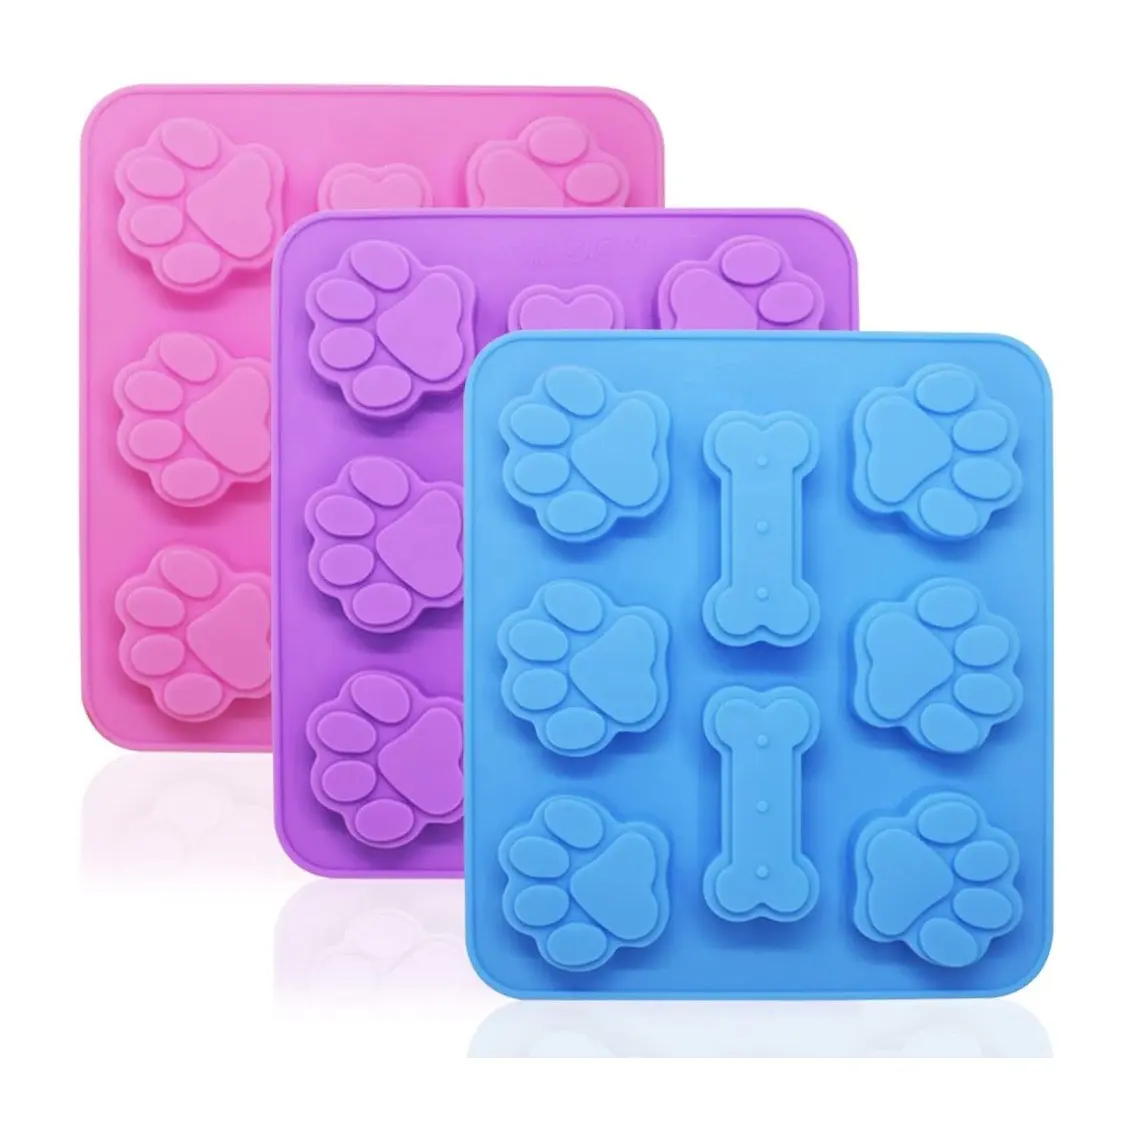 Silicone Molds Puppy Dog Paw & Bone Shaped 2 in 1, 8-Cavity, Reusable Ice Candy Trays Chocolate Cookies Baking Pans